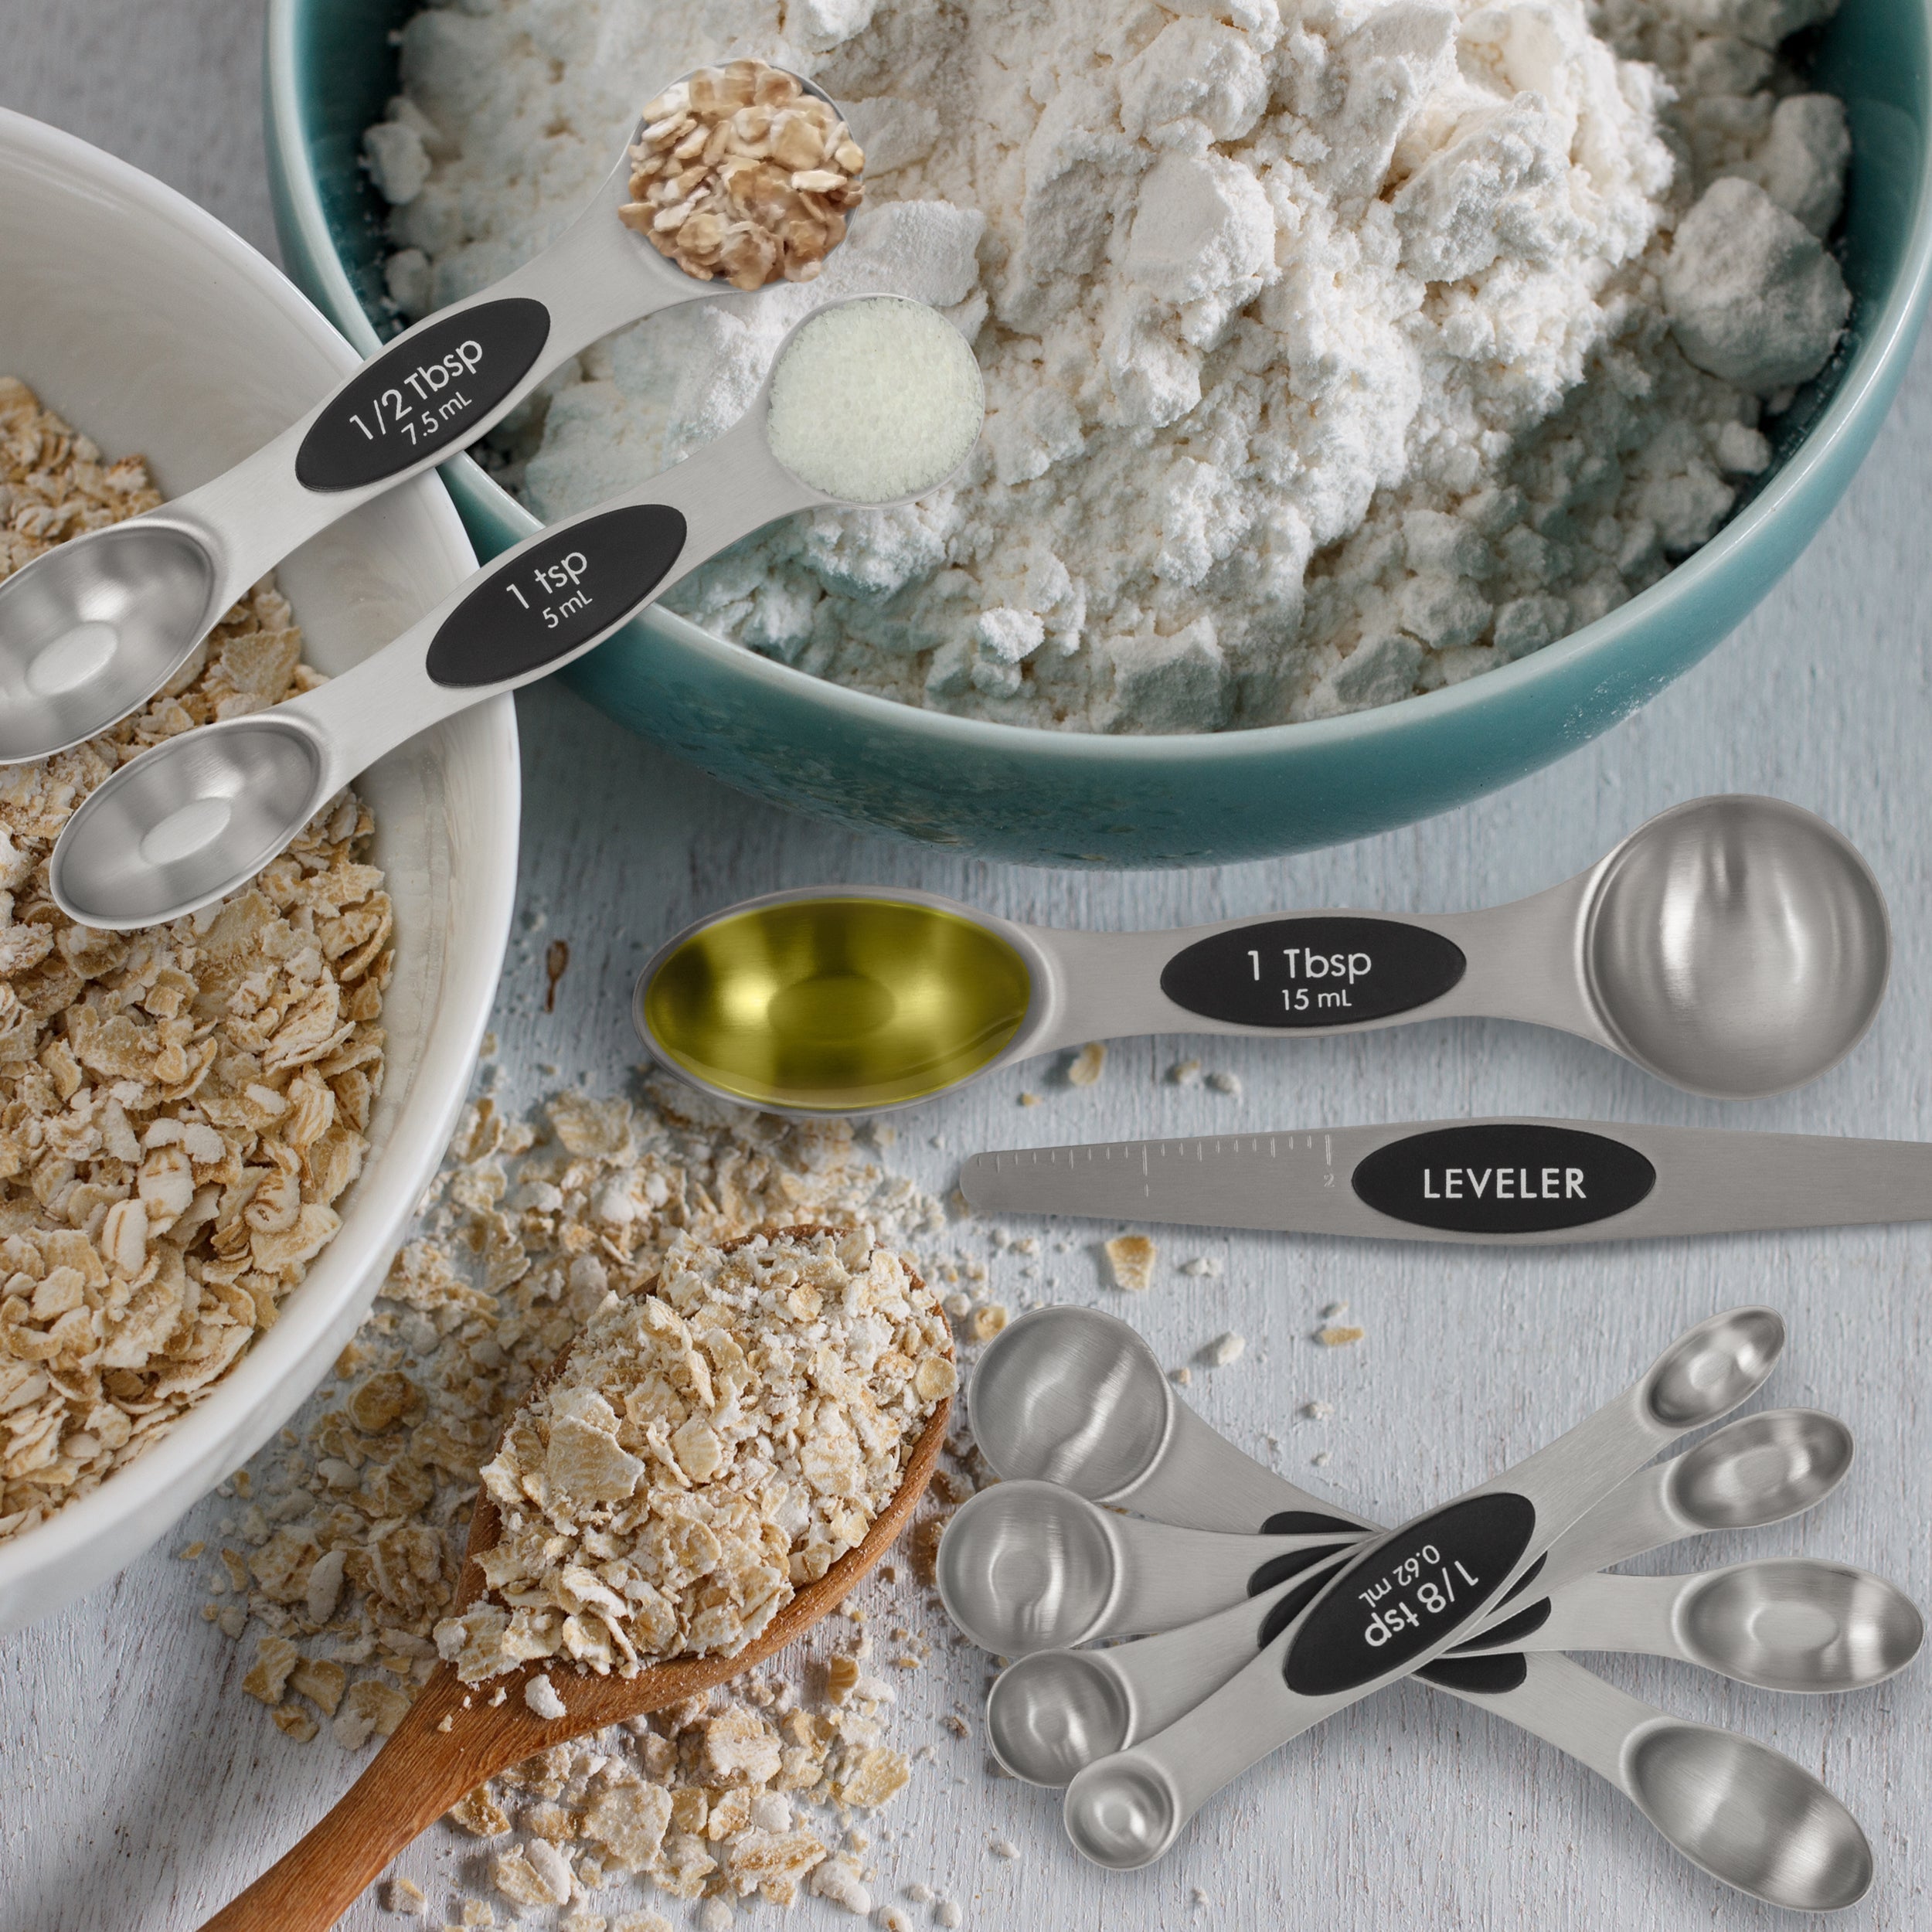 Magnetic Measuring Spoons with Leveler - Zulay KitchenZulay Kitchen